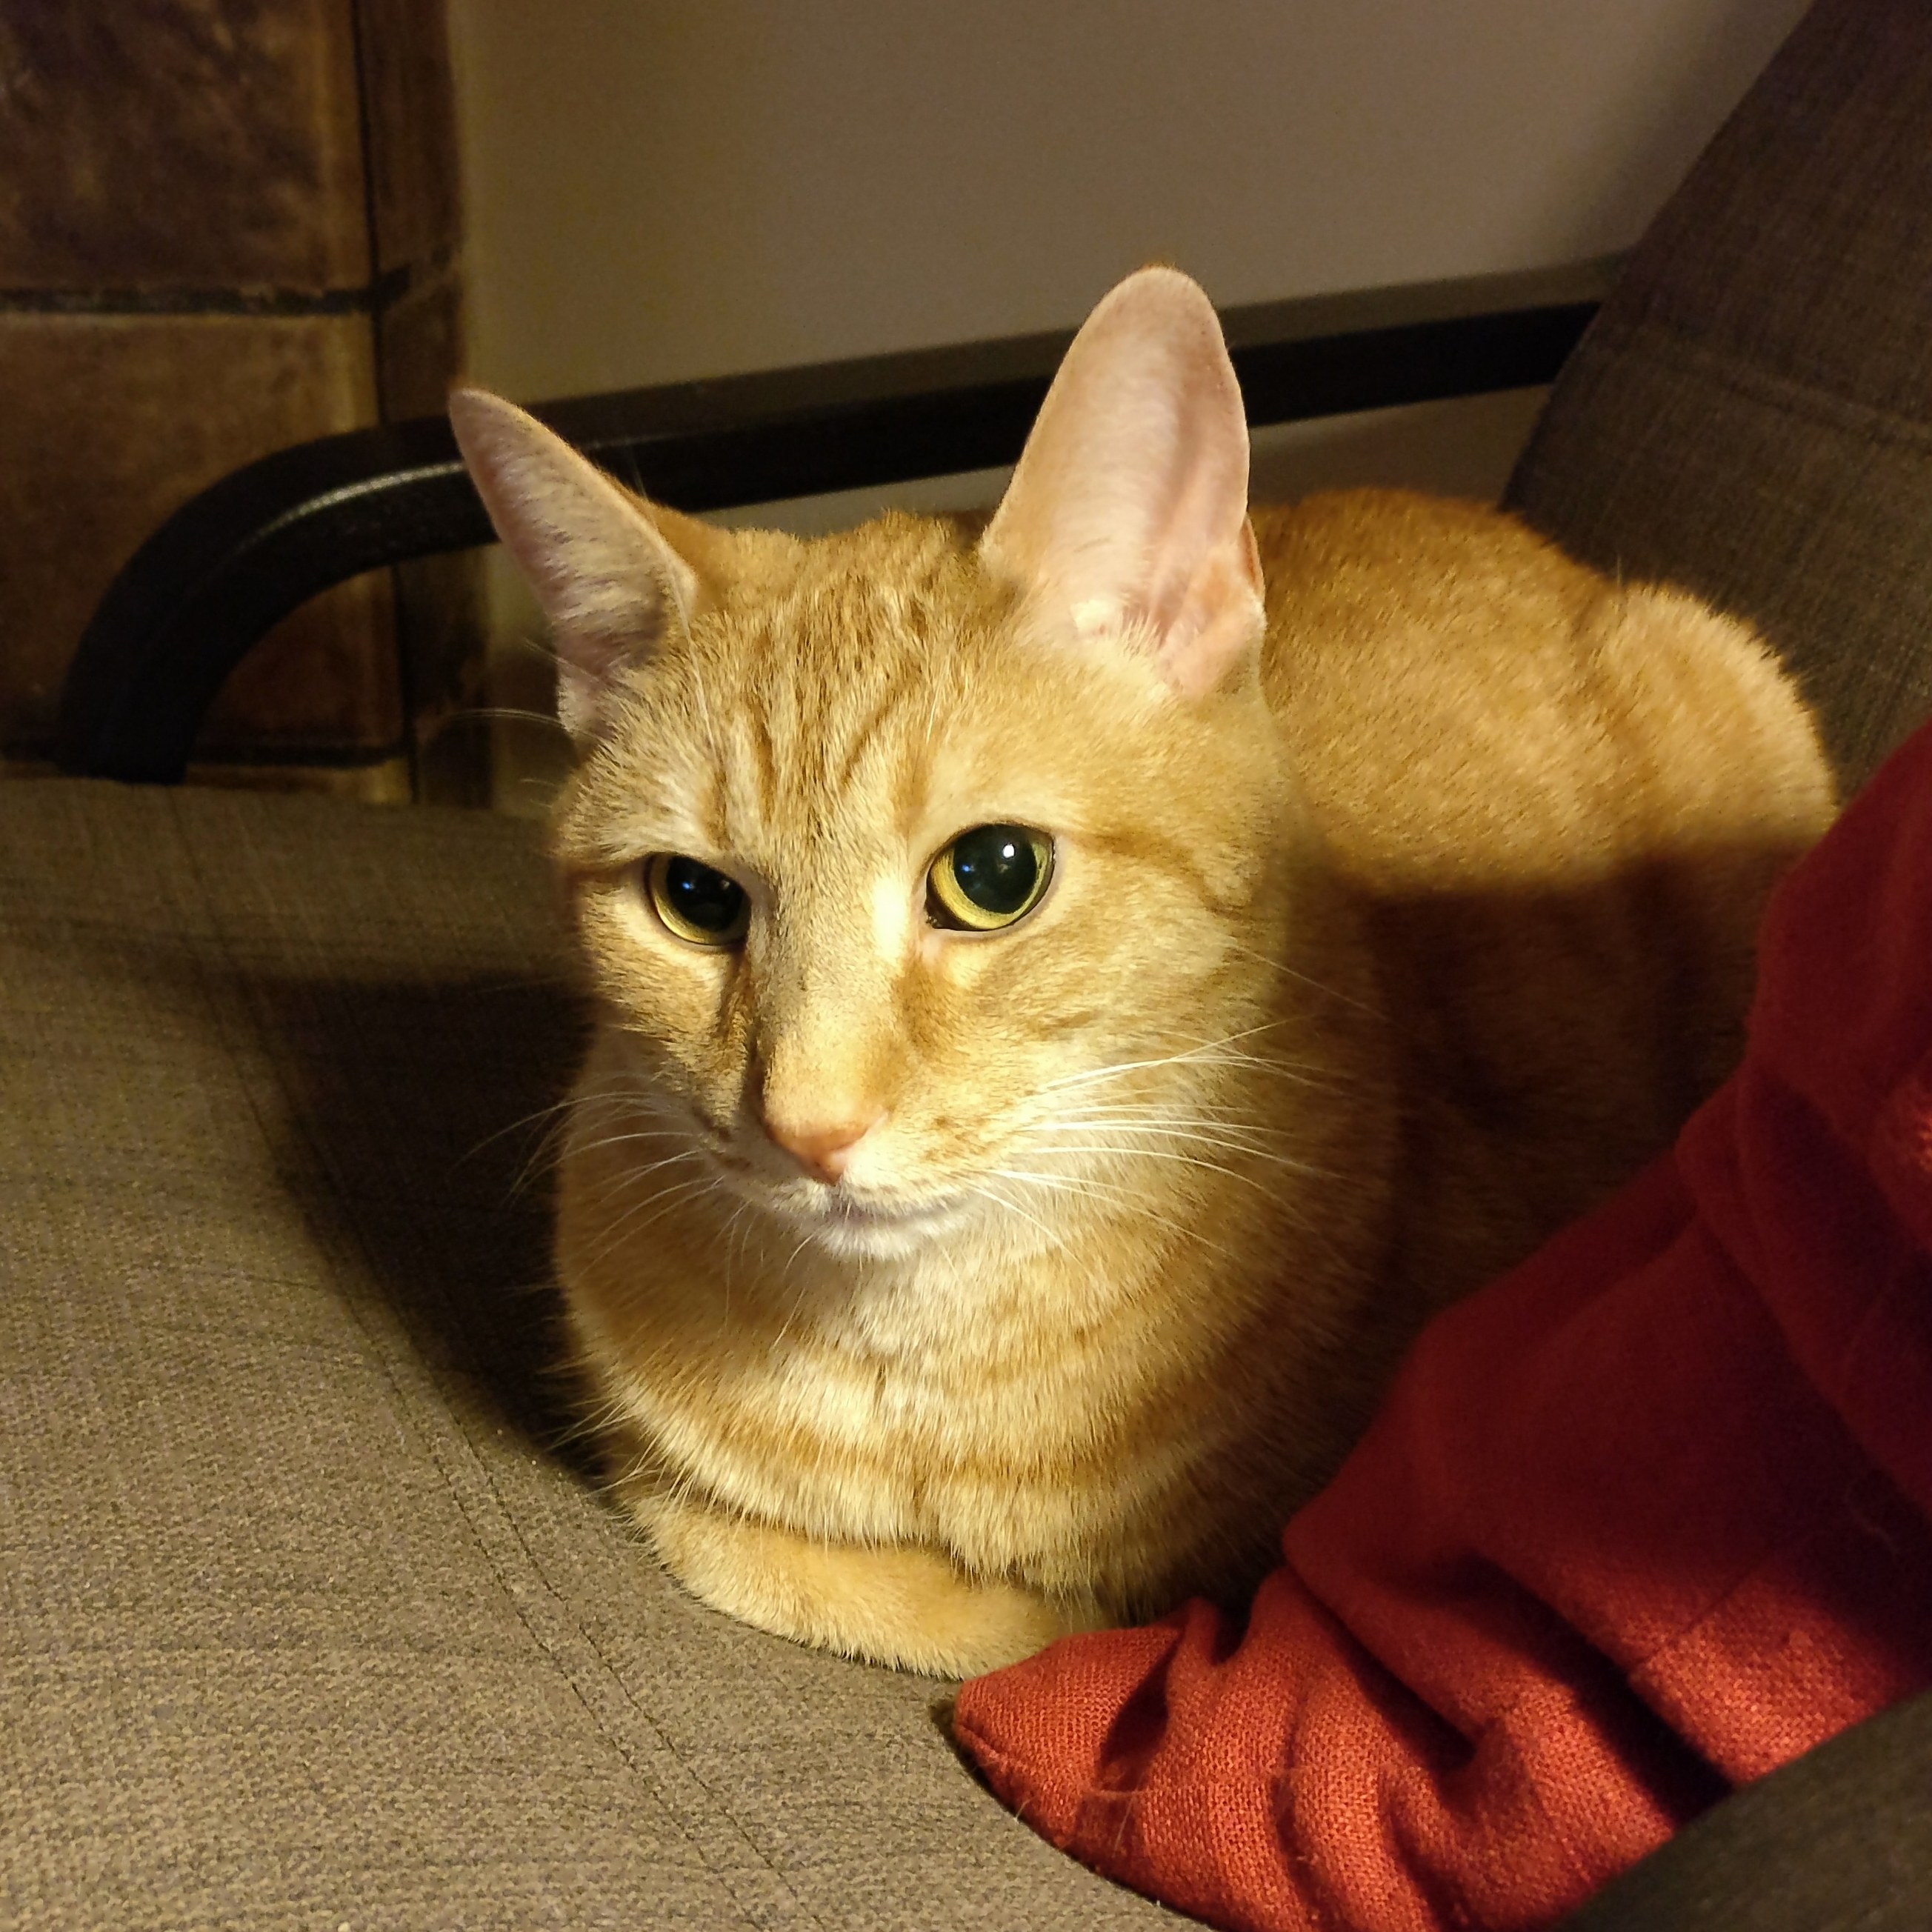 Louie being a cat loaf